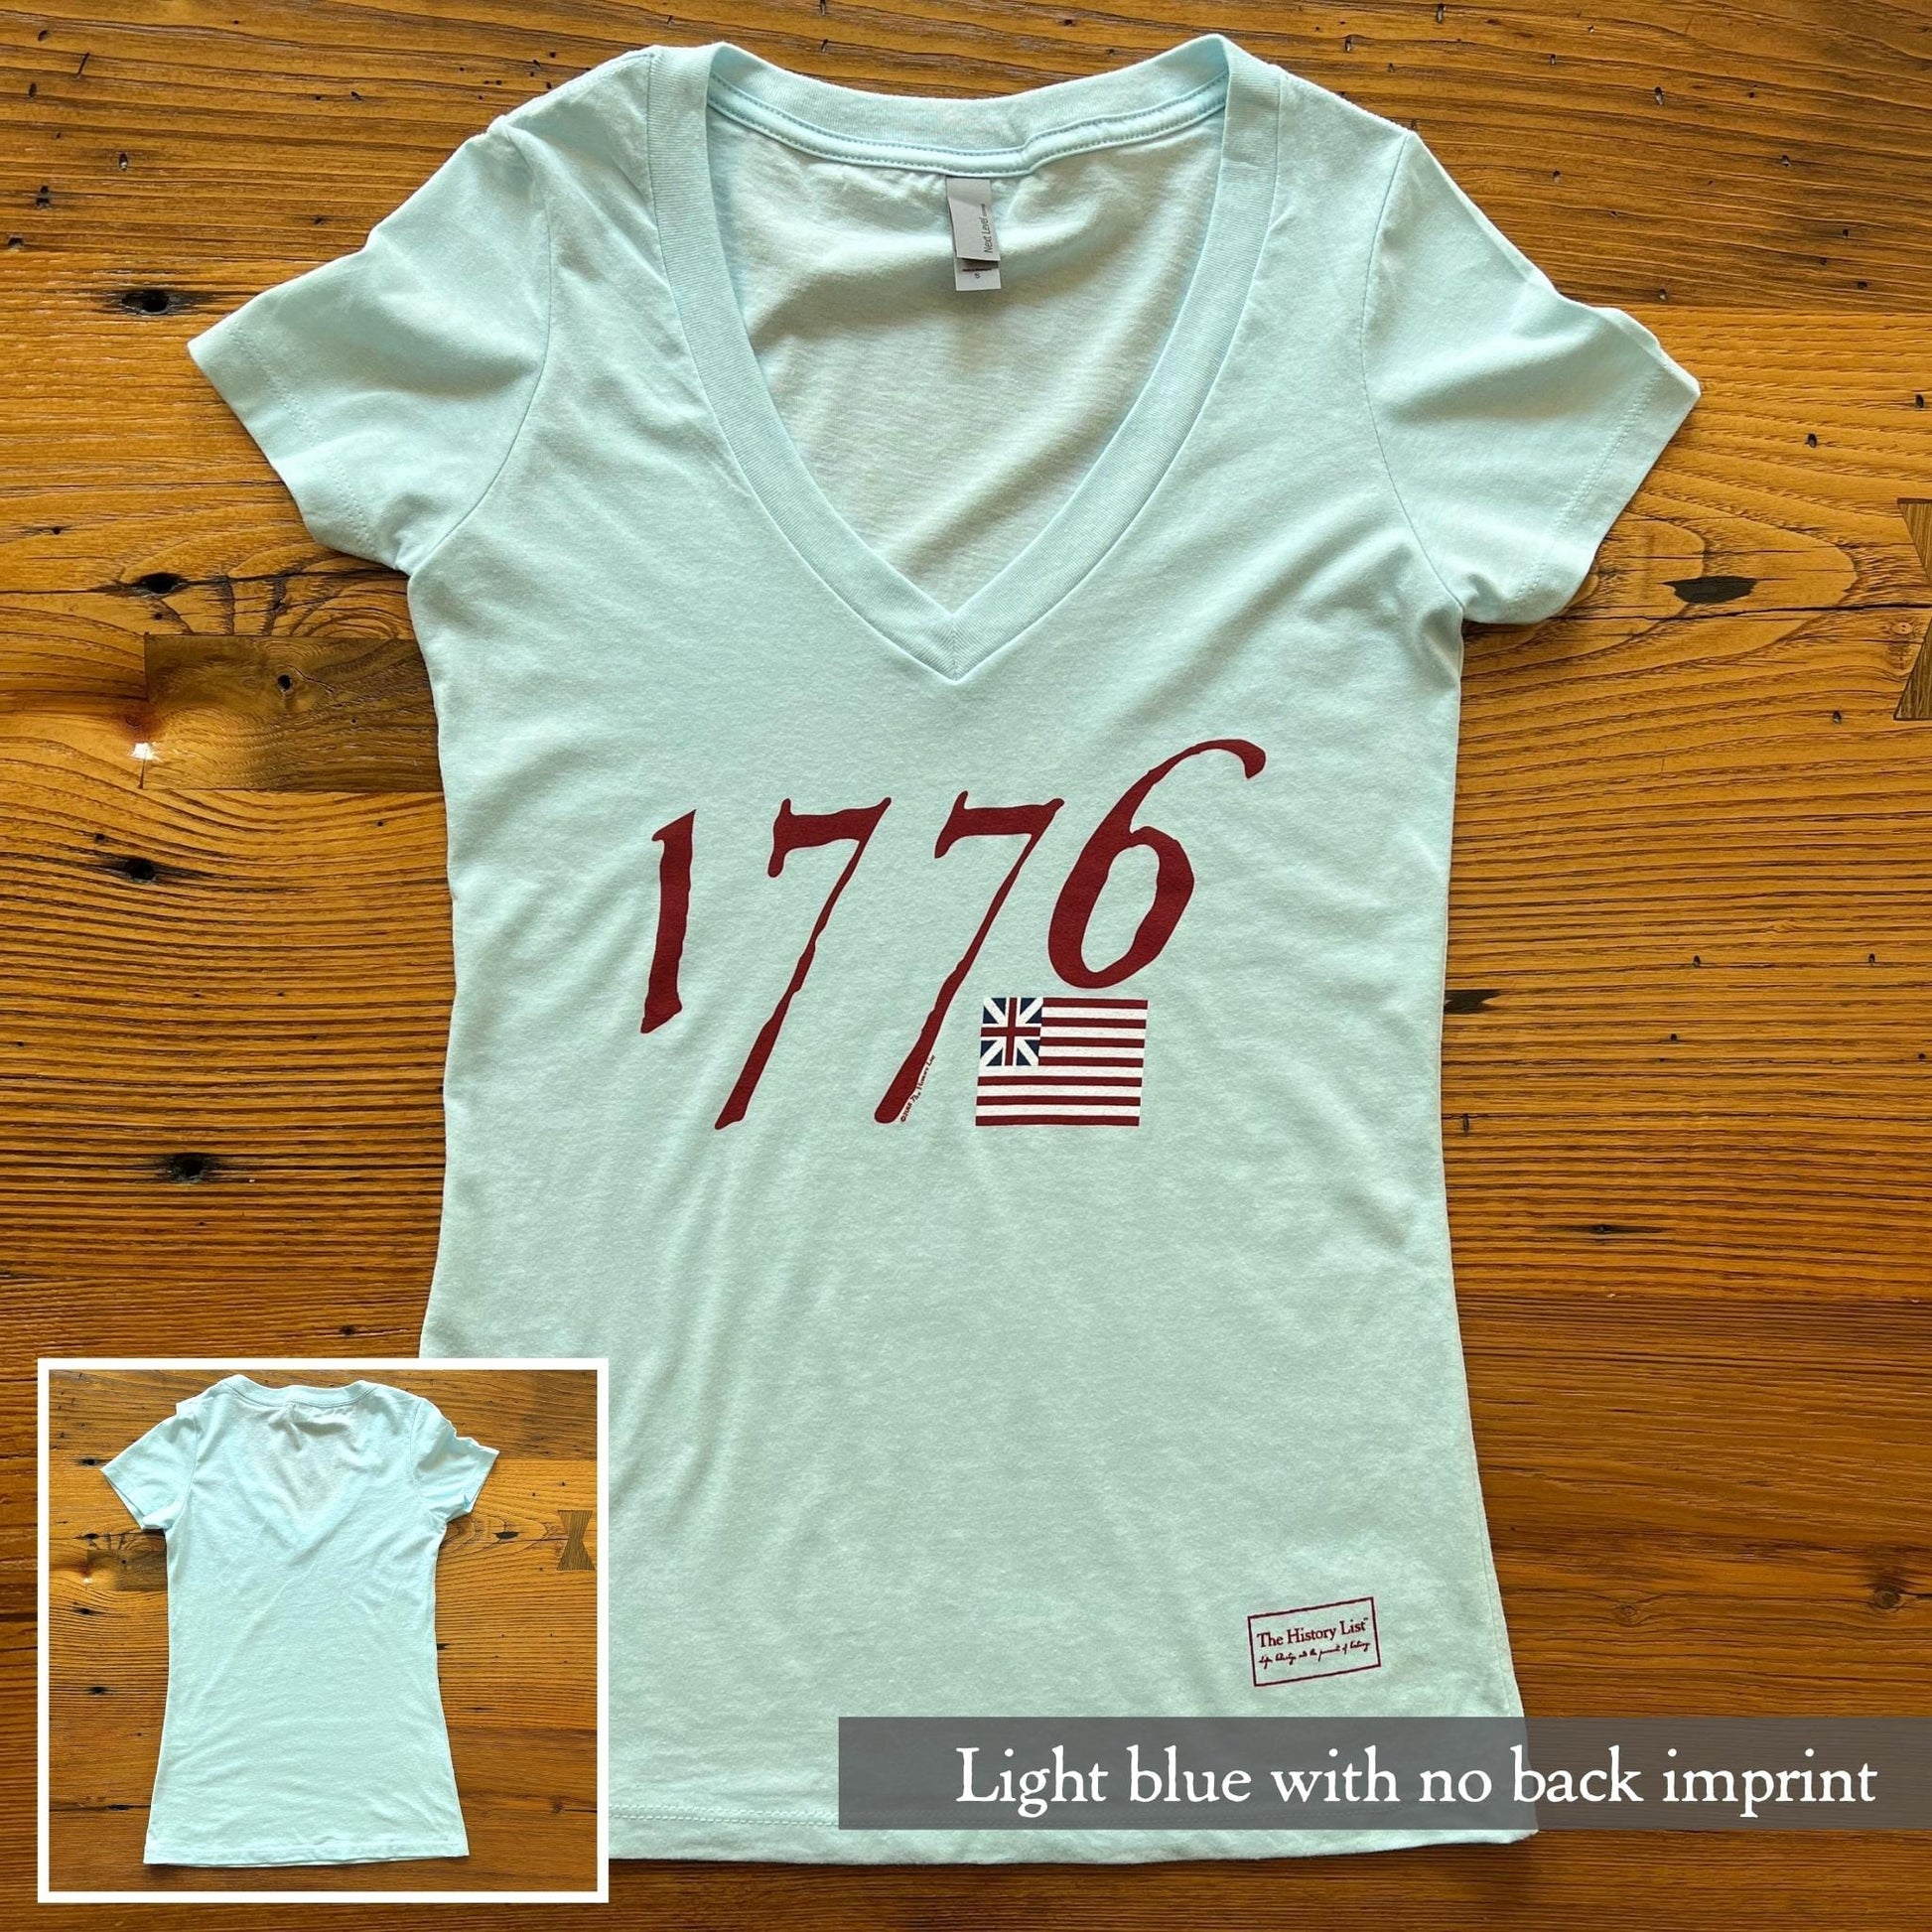 "We hold these truths - July 4, 1776” v-neck shirt from The History List store in Ice blue with no back imprint